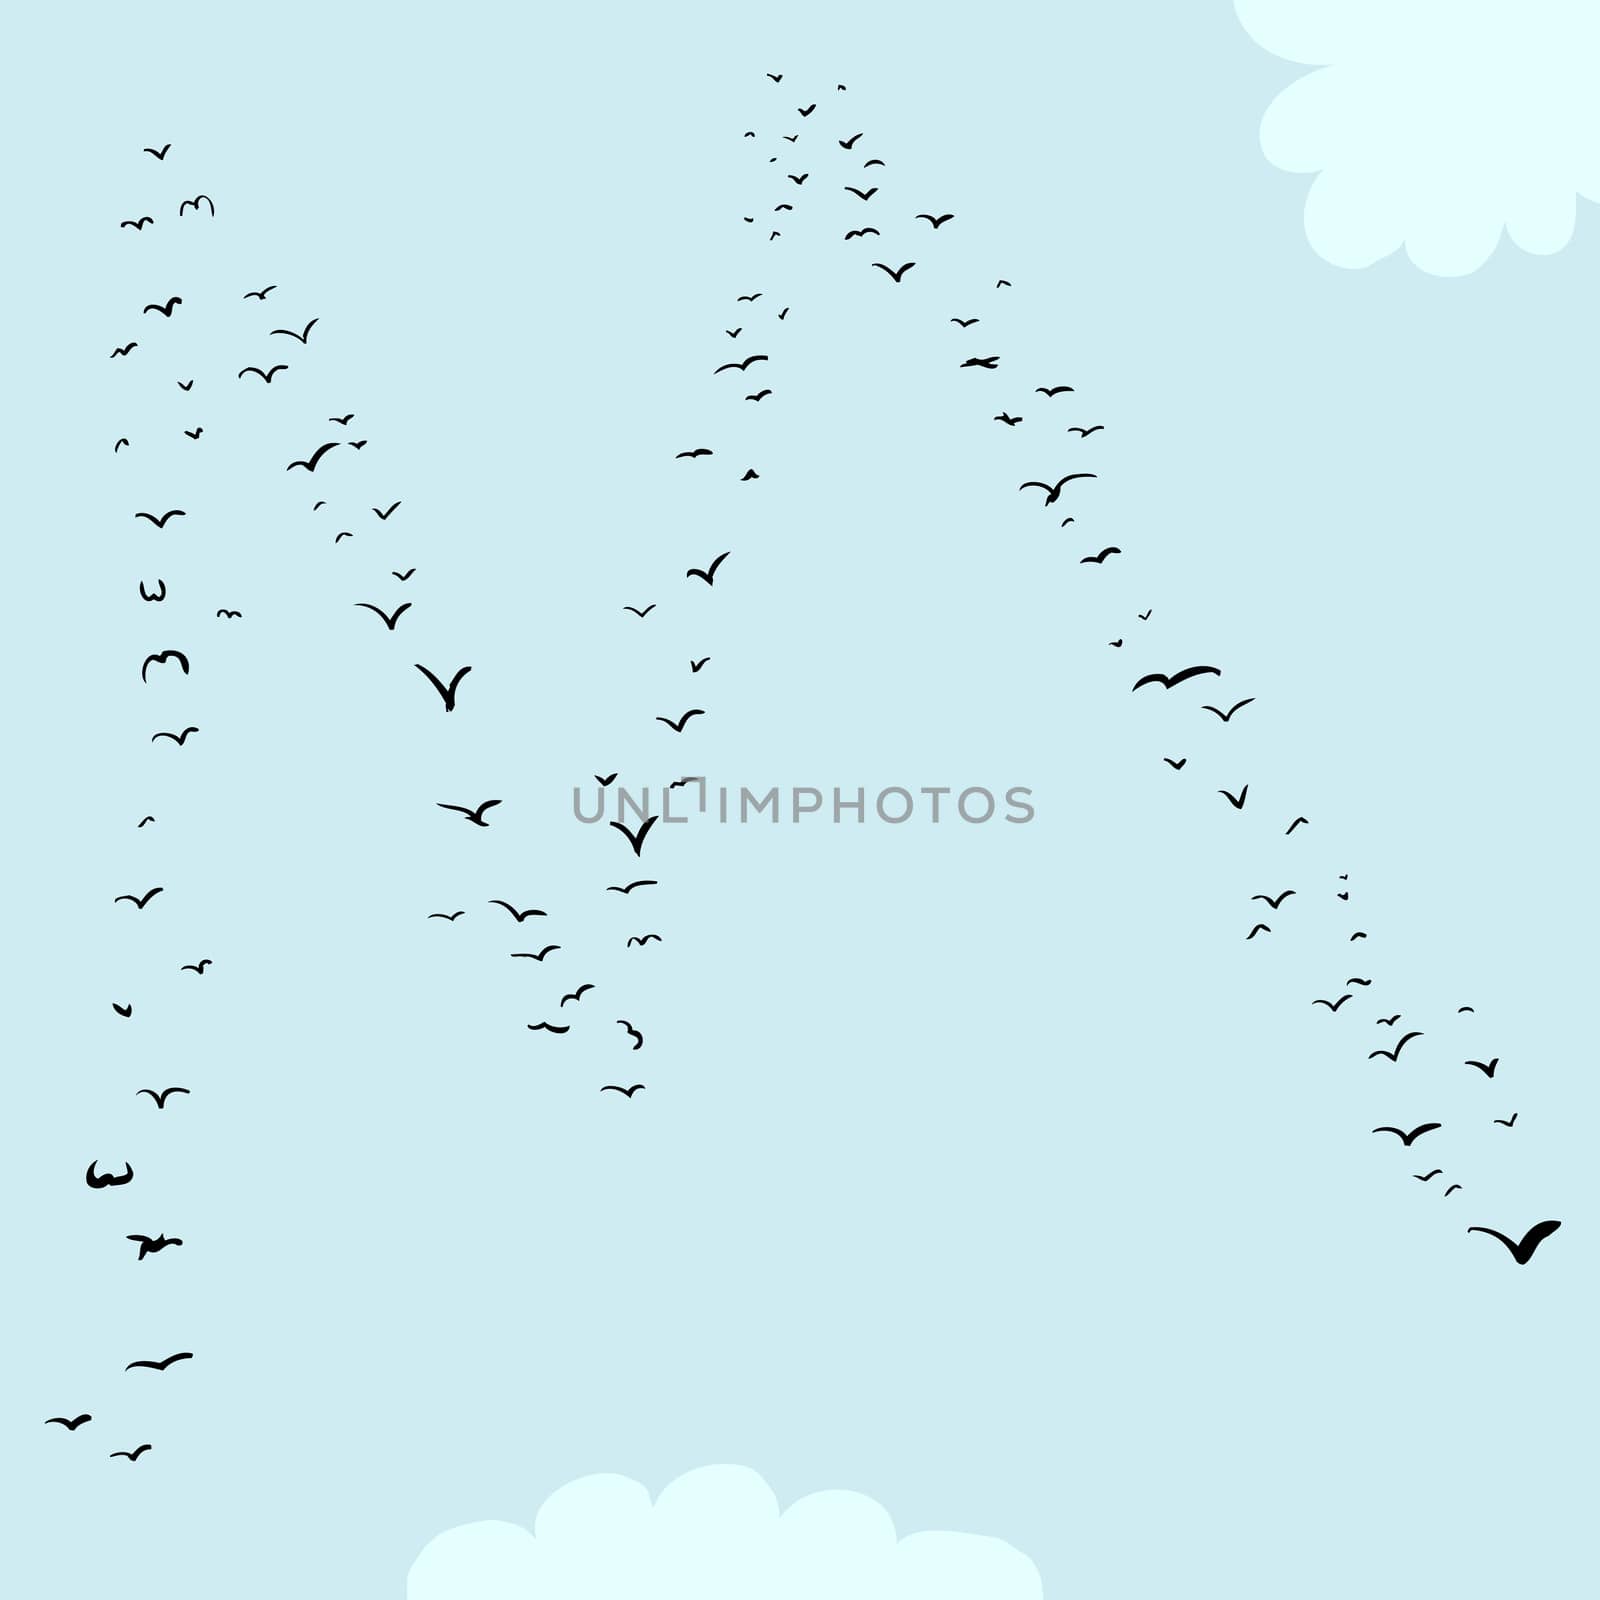 Illustration of a flock of birds in the shape of the letter m